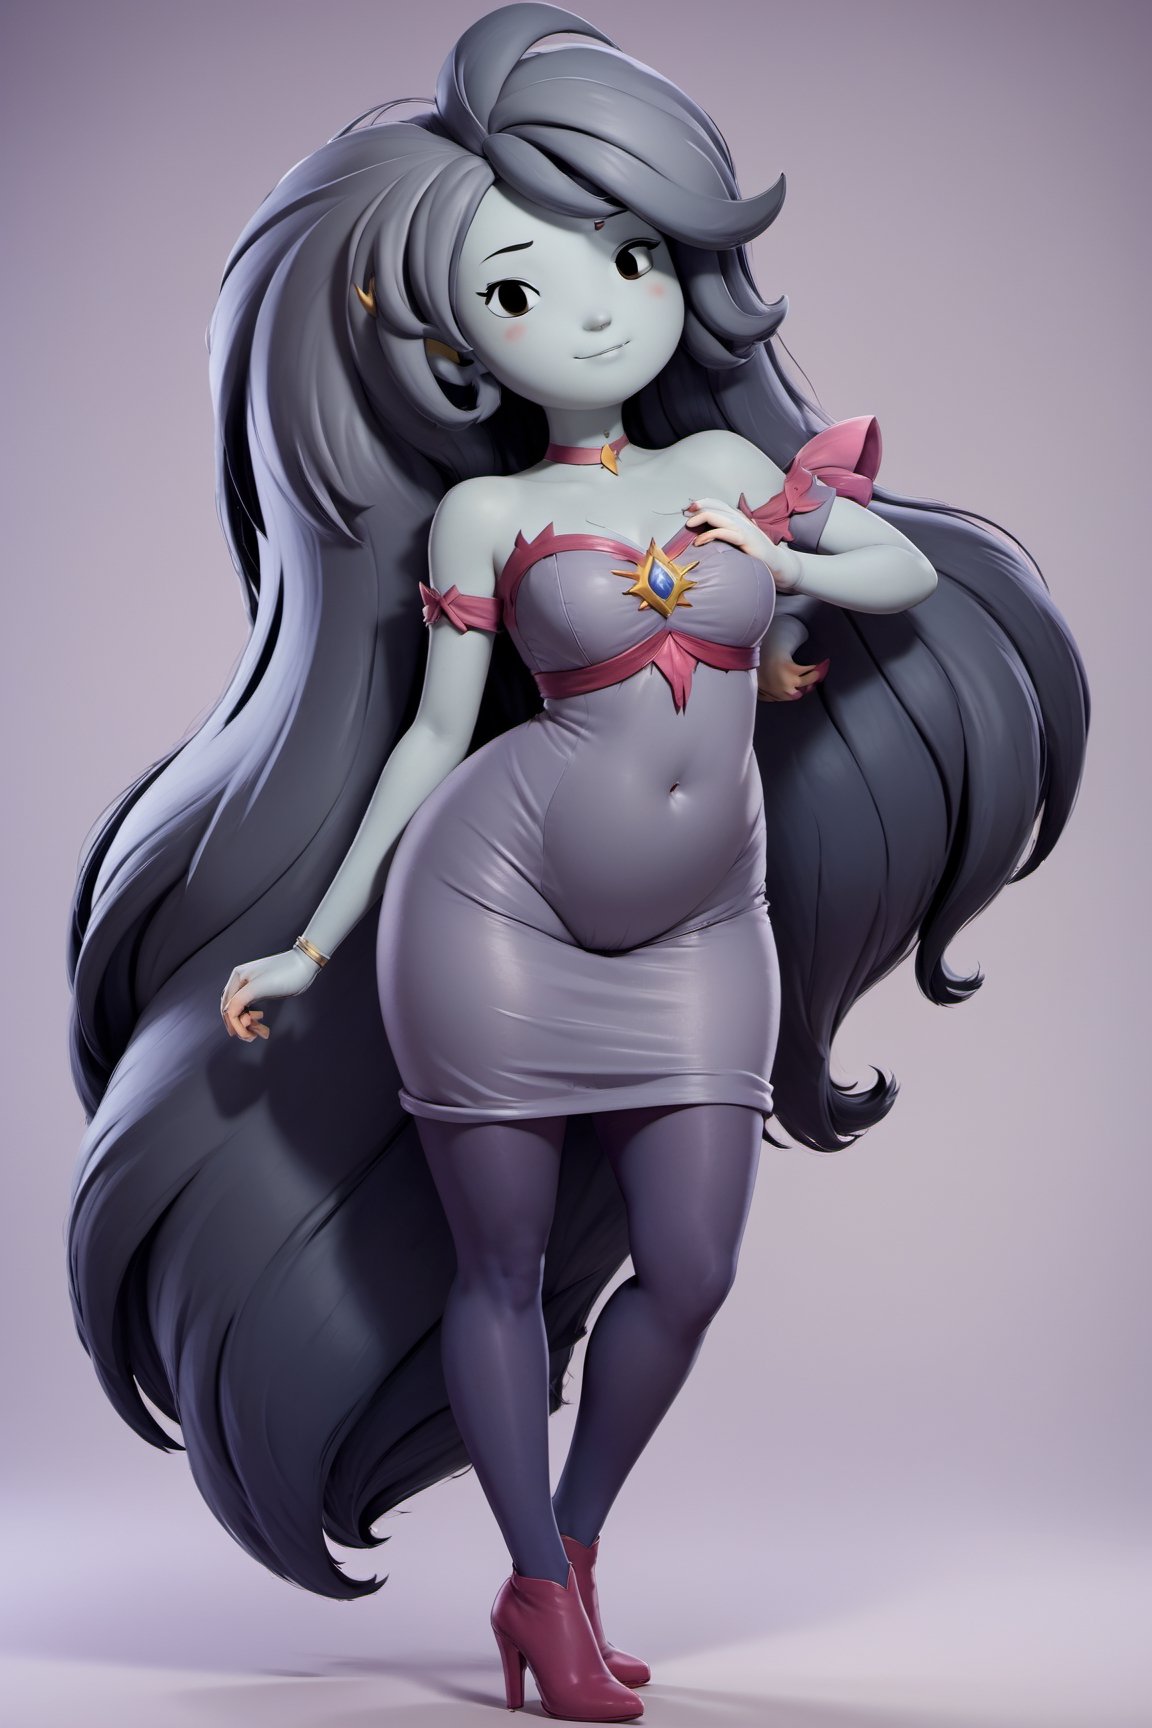 Upper body view, 3d style image of Marceline from Adventure Time, wearing a princess cosplay, big boobs, background of a magical forest, grey skin color